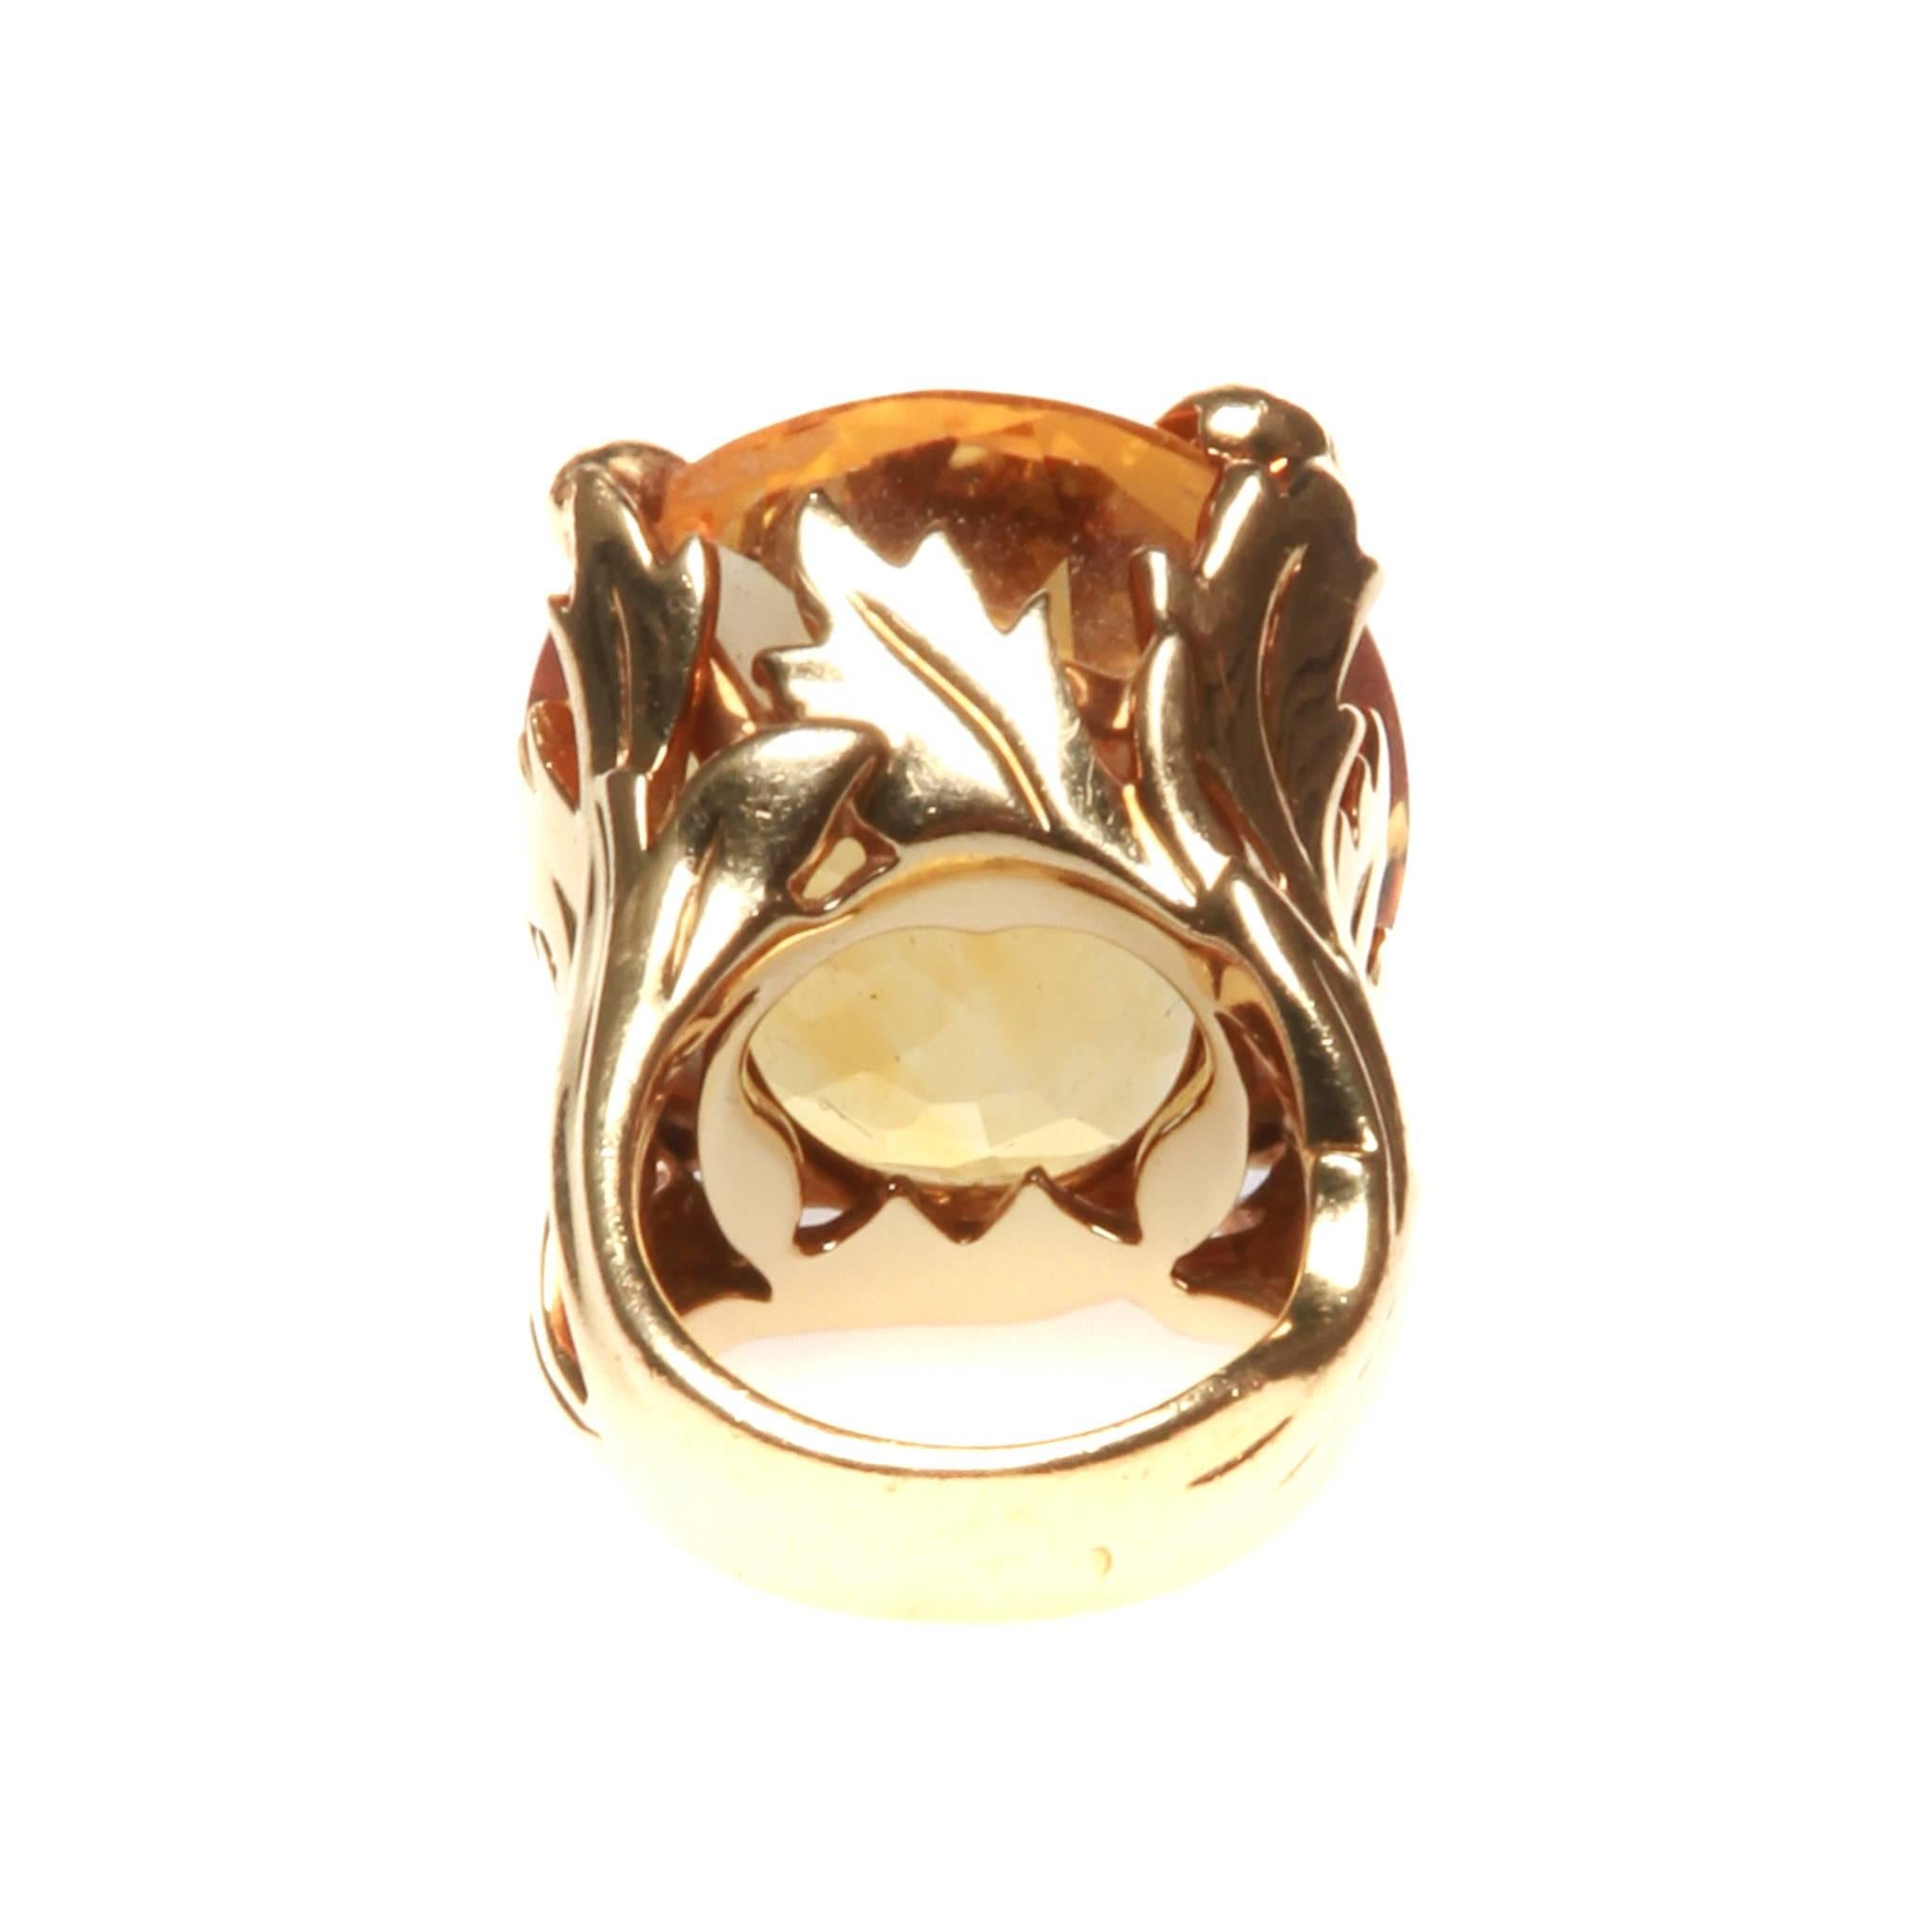 Brilliant Cut Christian Dior 'Miss Dior' Citrine 18ct Gold Setting with Diamond Accent For Sale